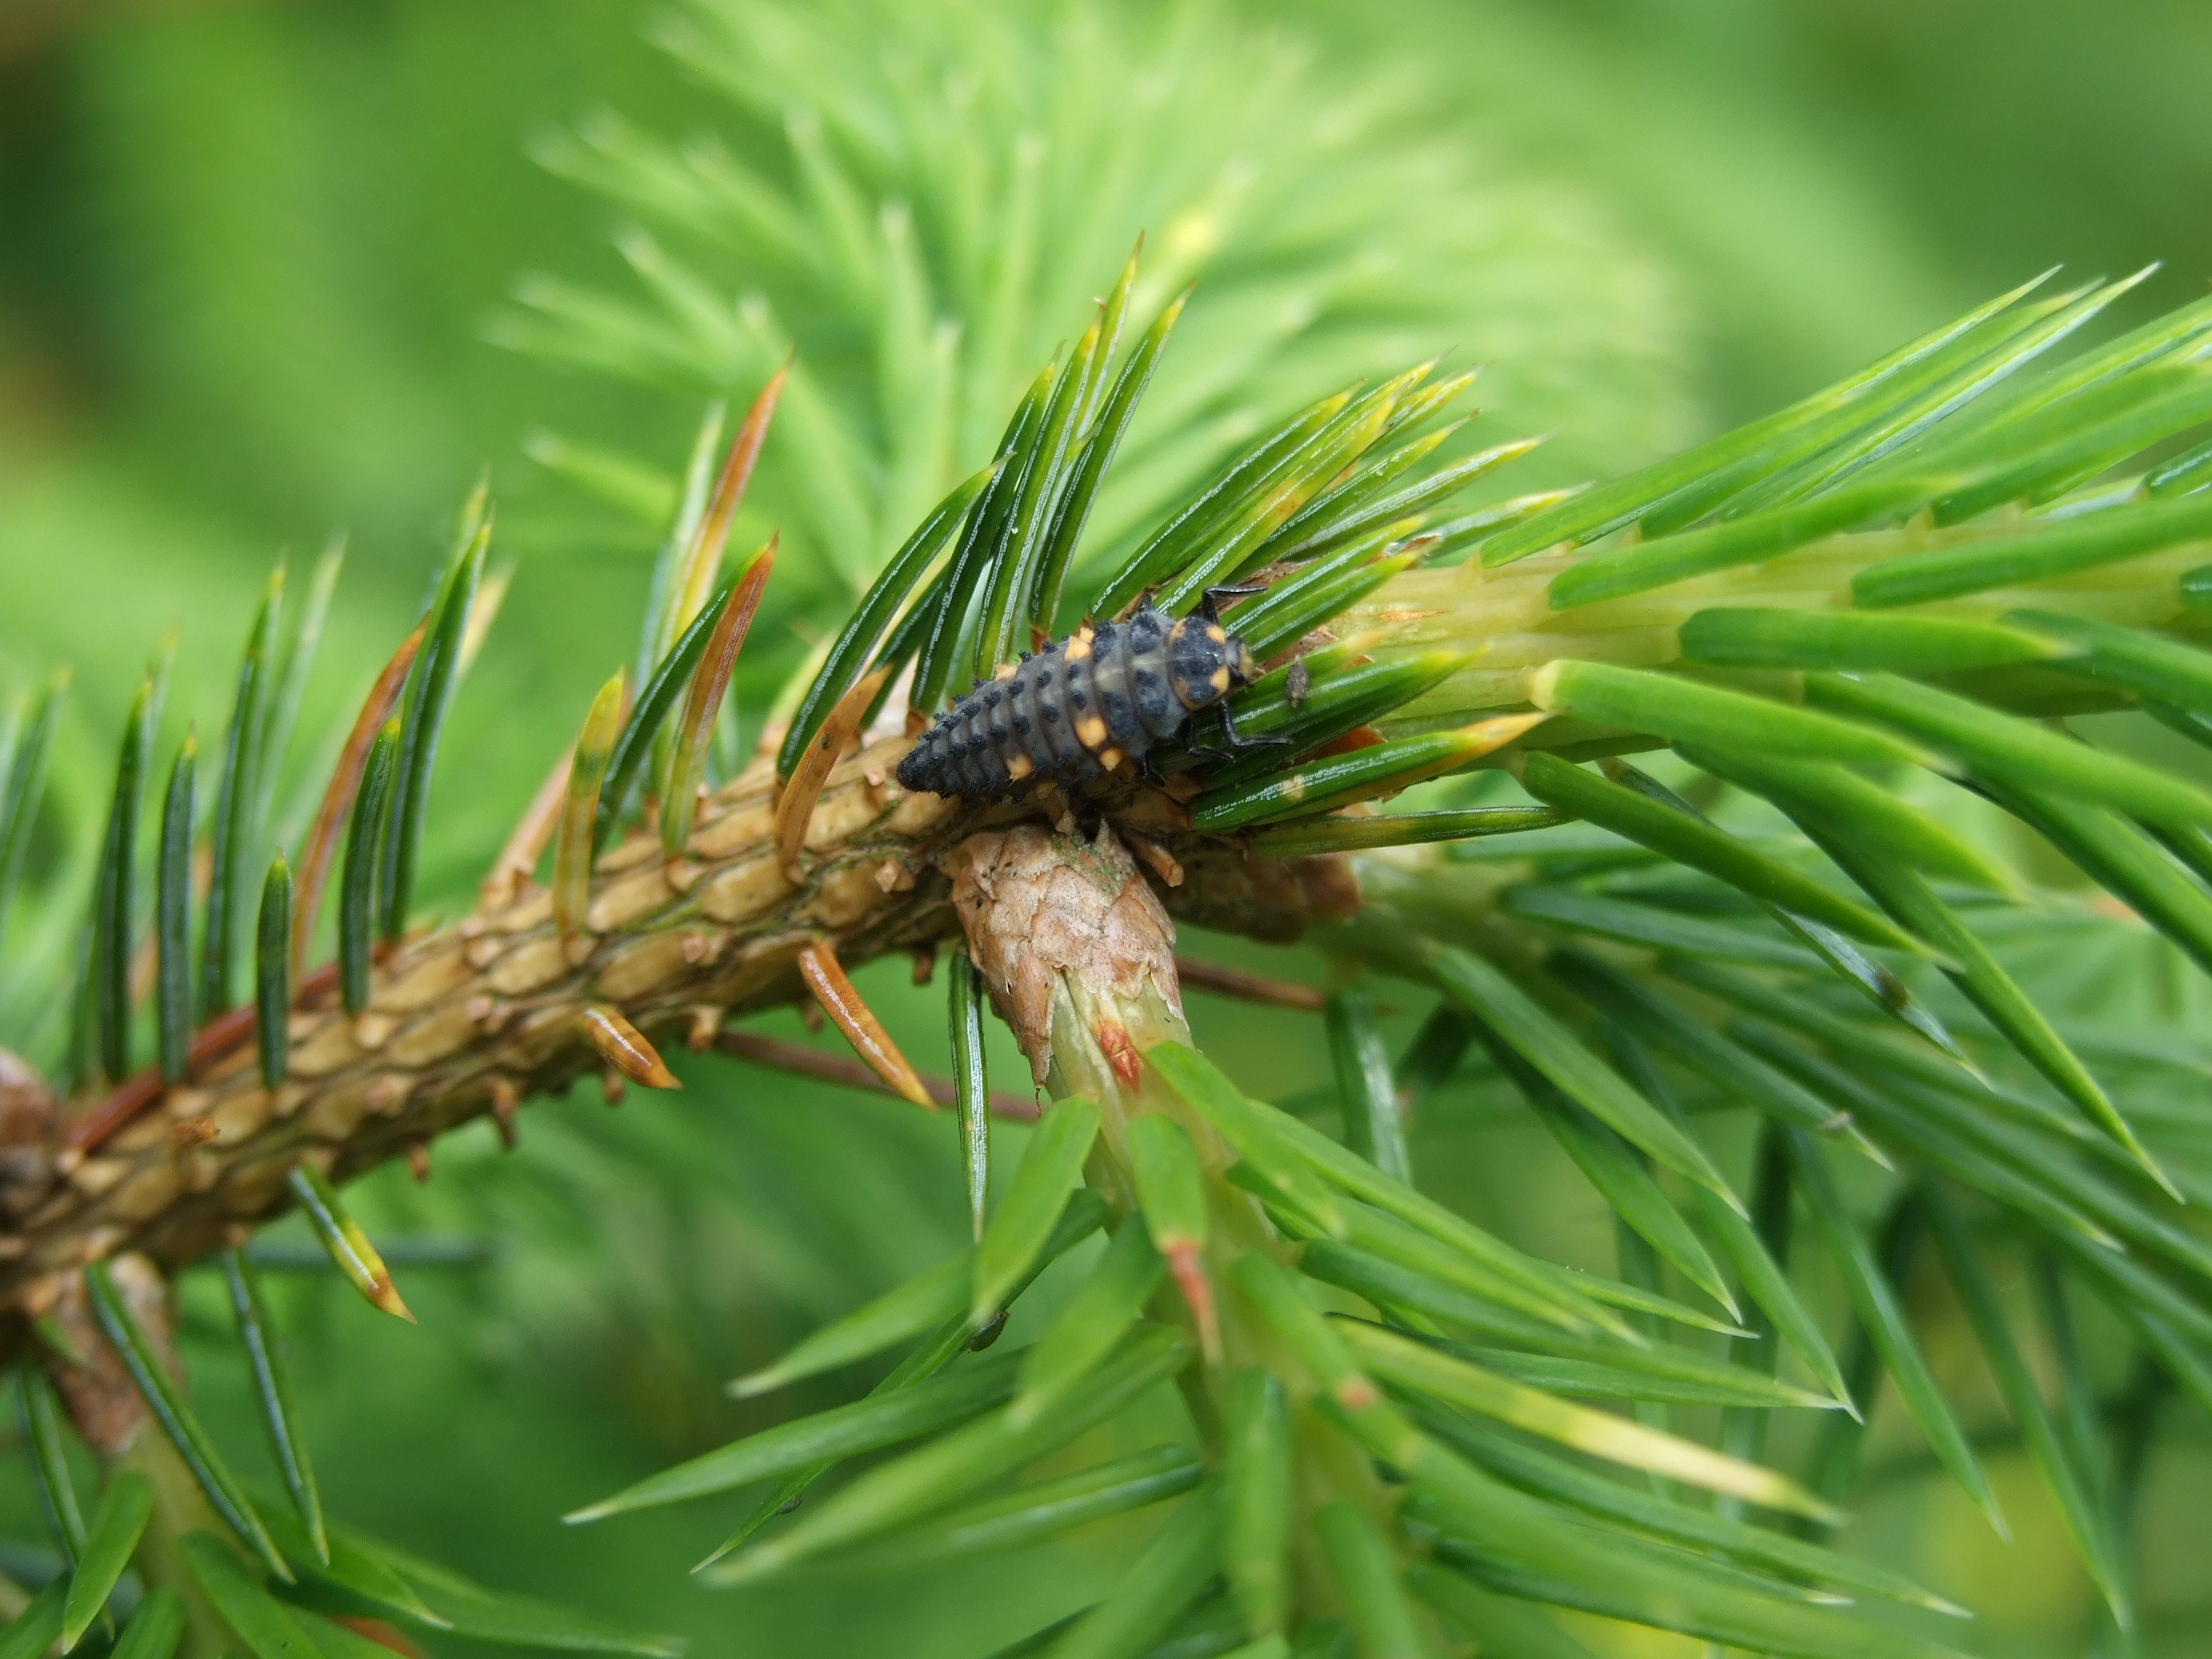 Aphids frequently cauce serious damage to the needles of Sitka spruce trees. Ladybird larvae are natural predators and contribute to aphid population control